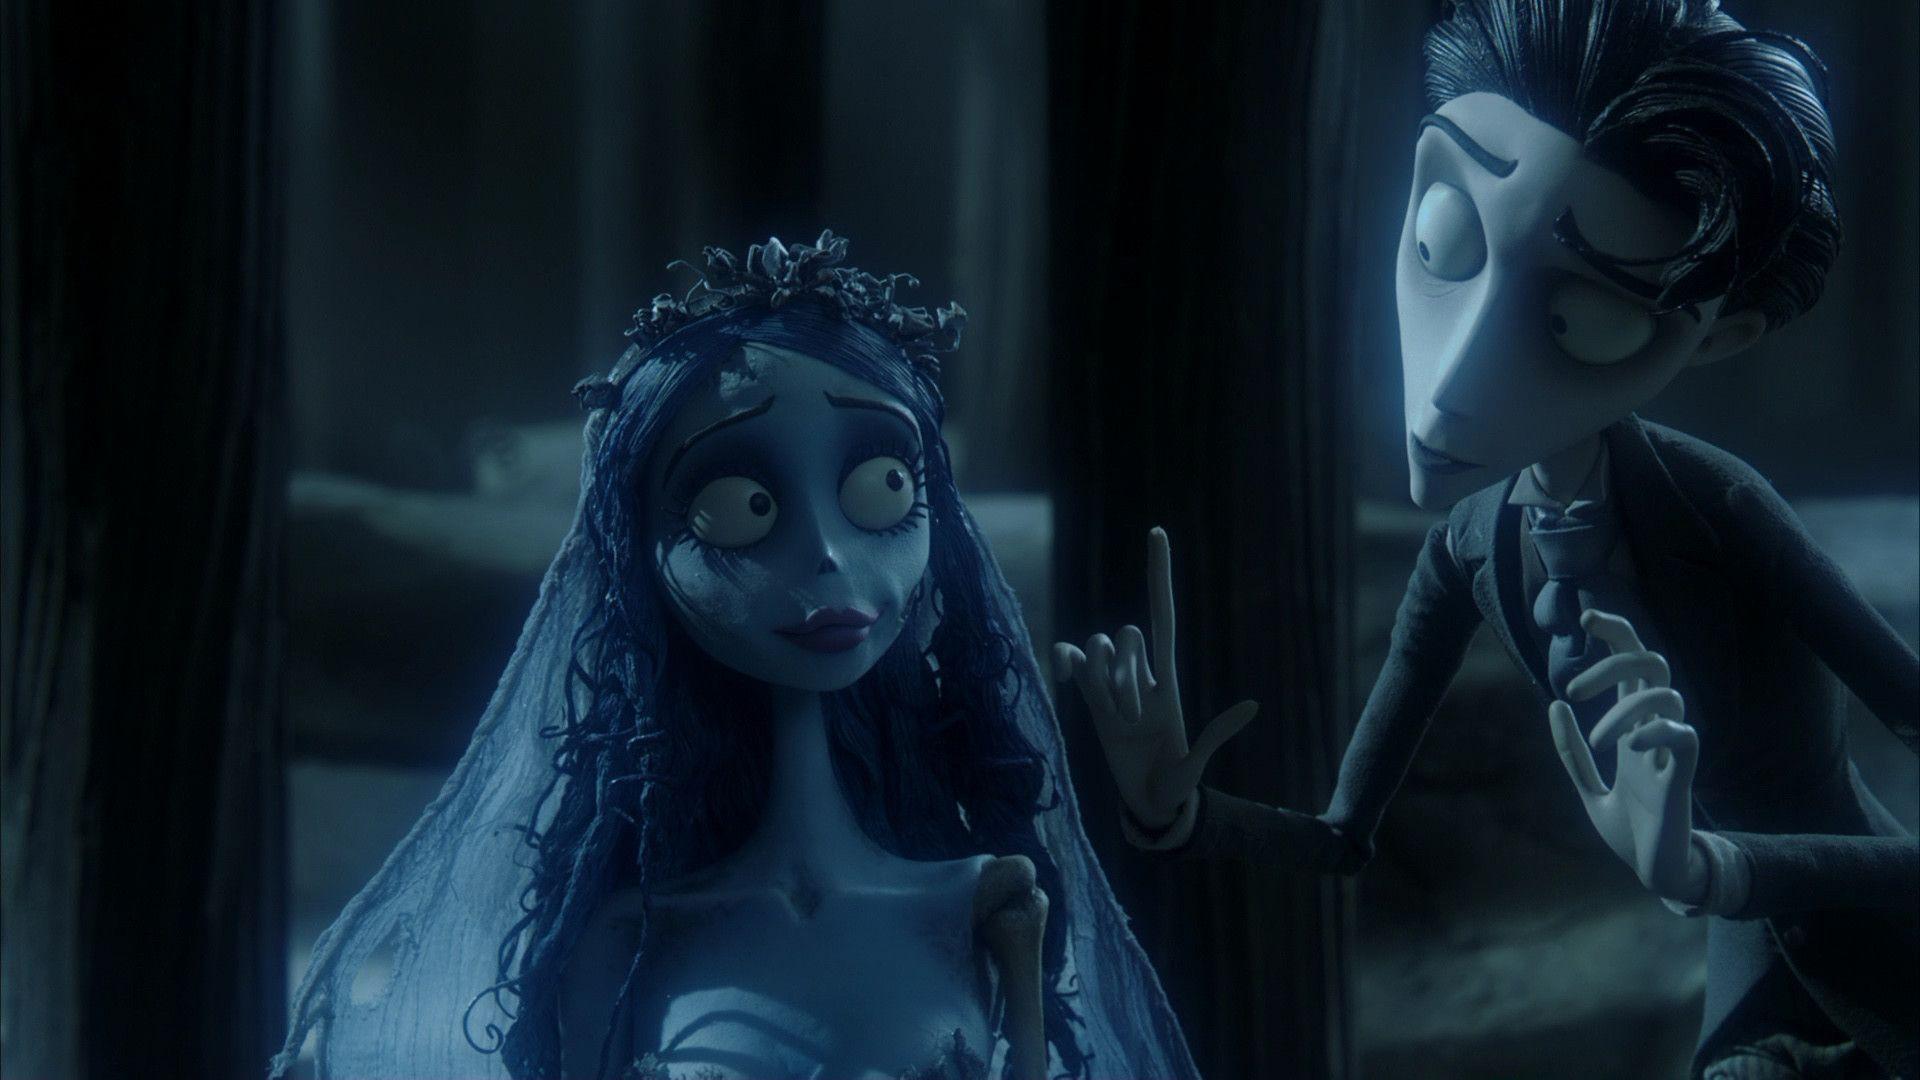 Corpse Bride Wallpapers - Top Free Corpse Bride Backgrounds